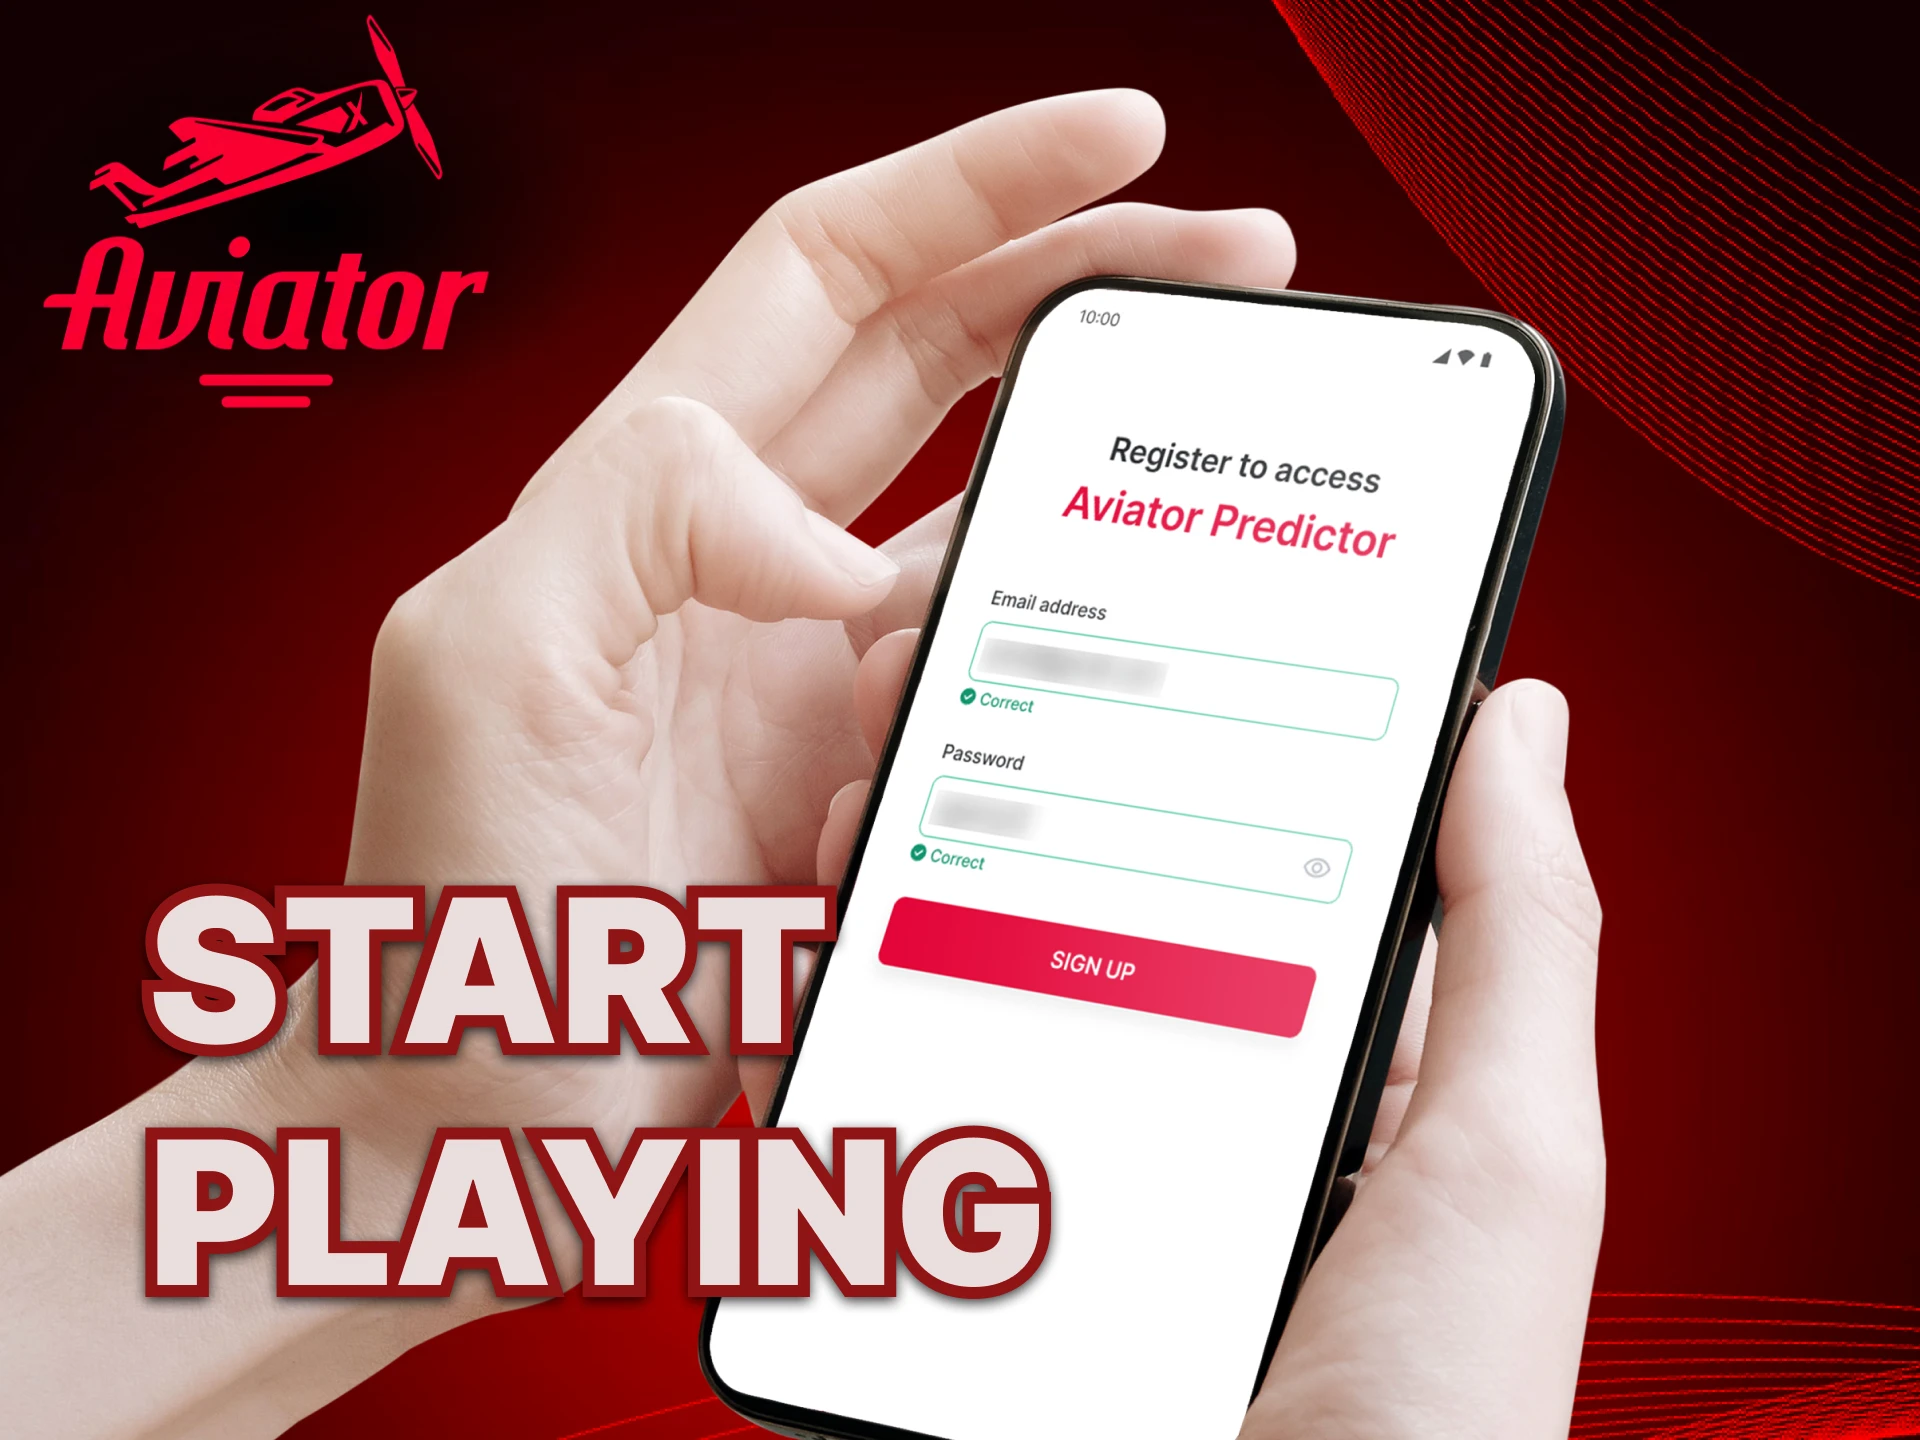 How to use Aviator Predictor while playing.